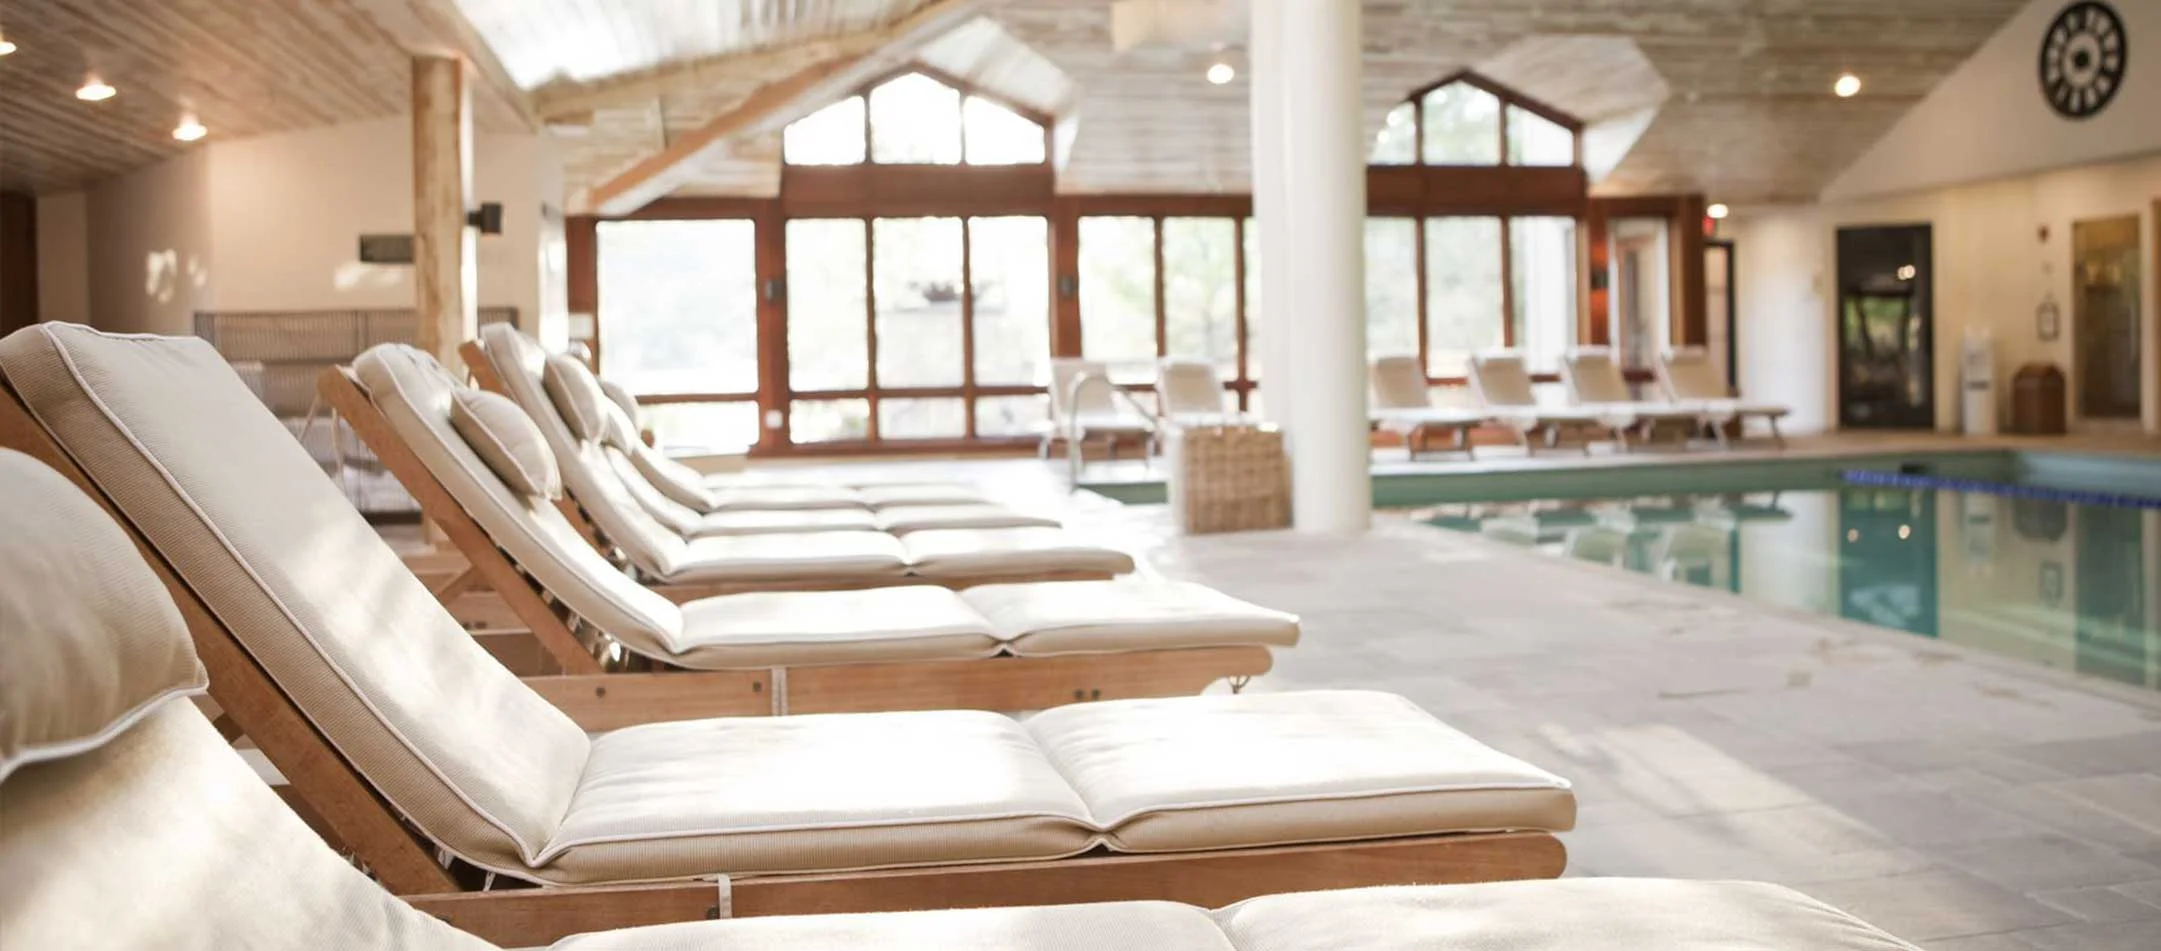 spa at topnotch resort in stowe